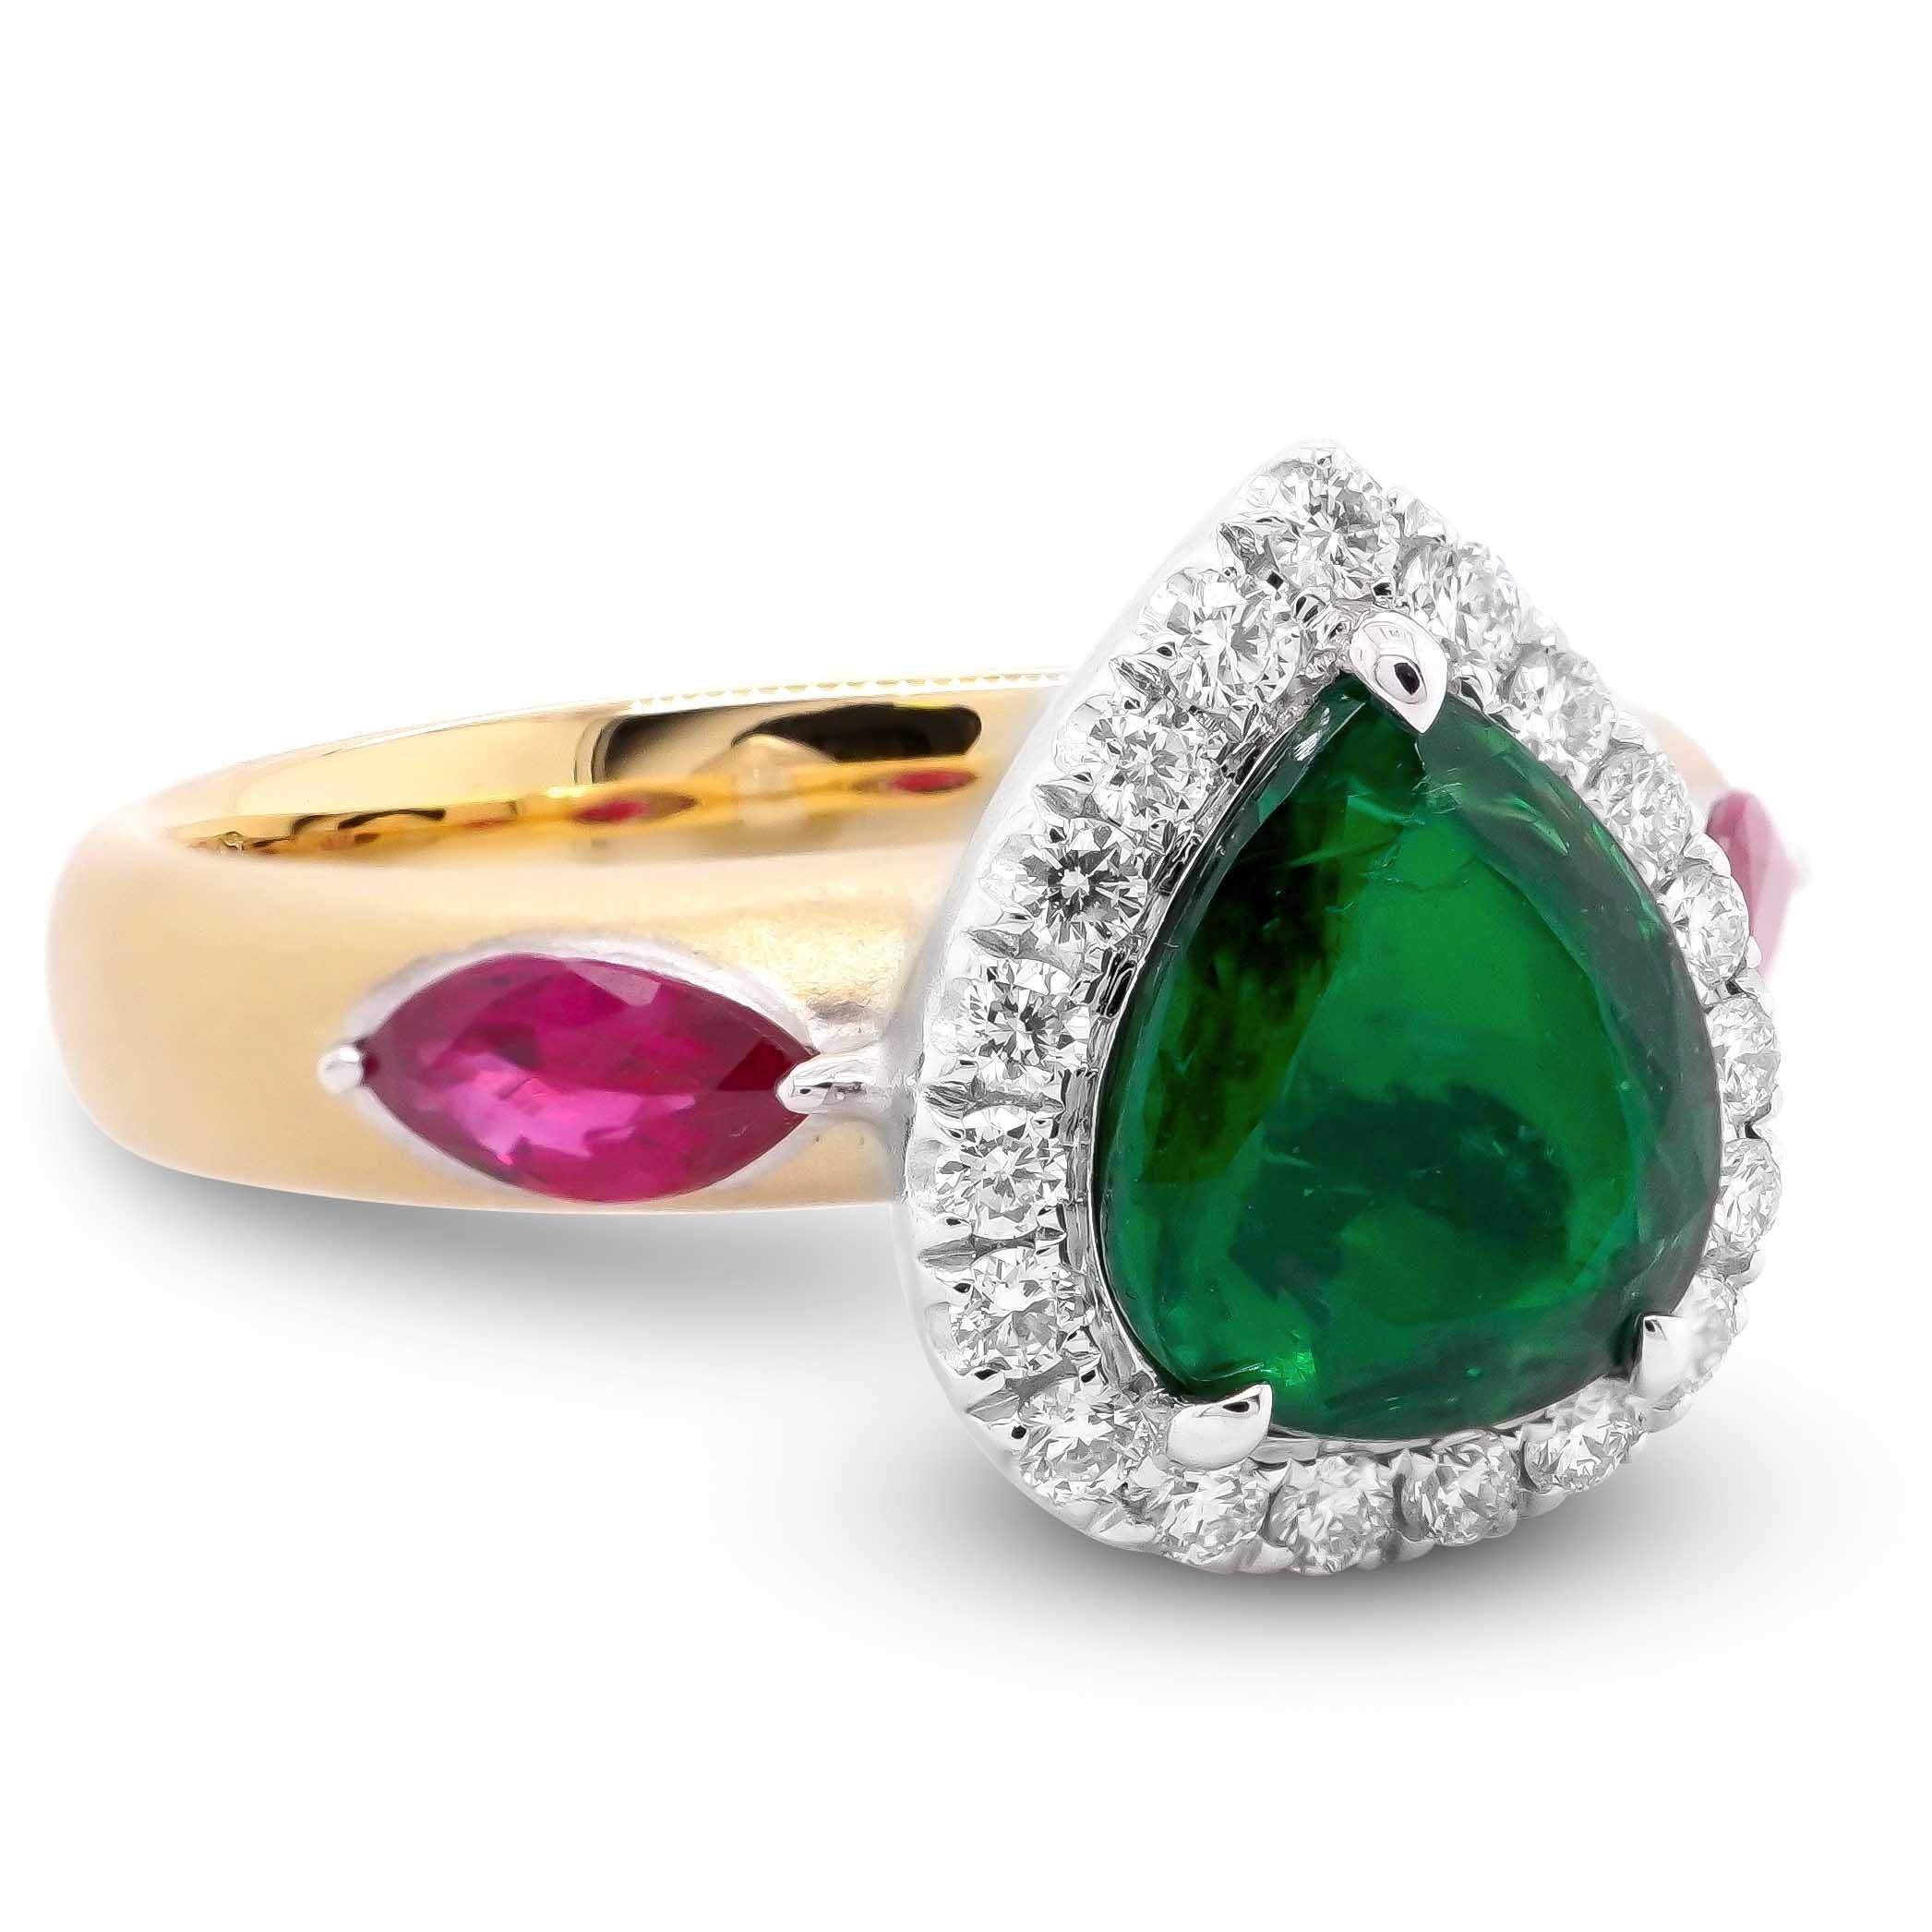 Art Nouveau 1.05 Carat Vivid Green Emerald Flanked by Ruby Marquise Matt Finish 18K Gold For Sale